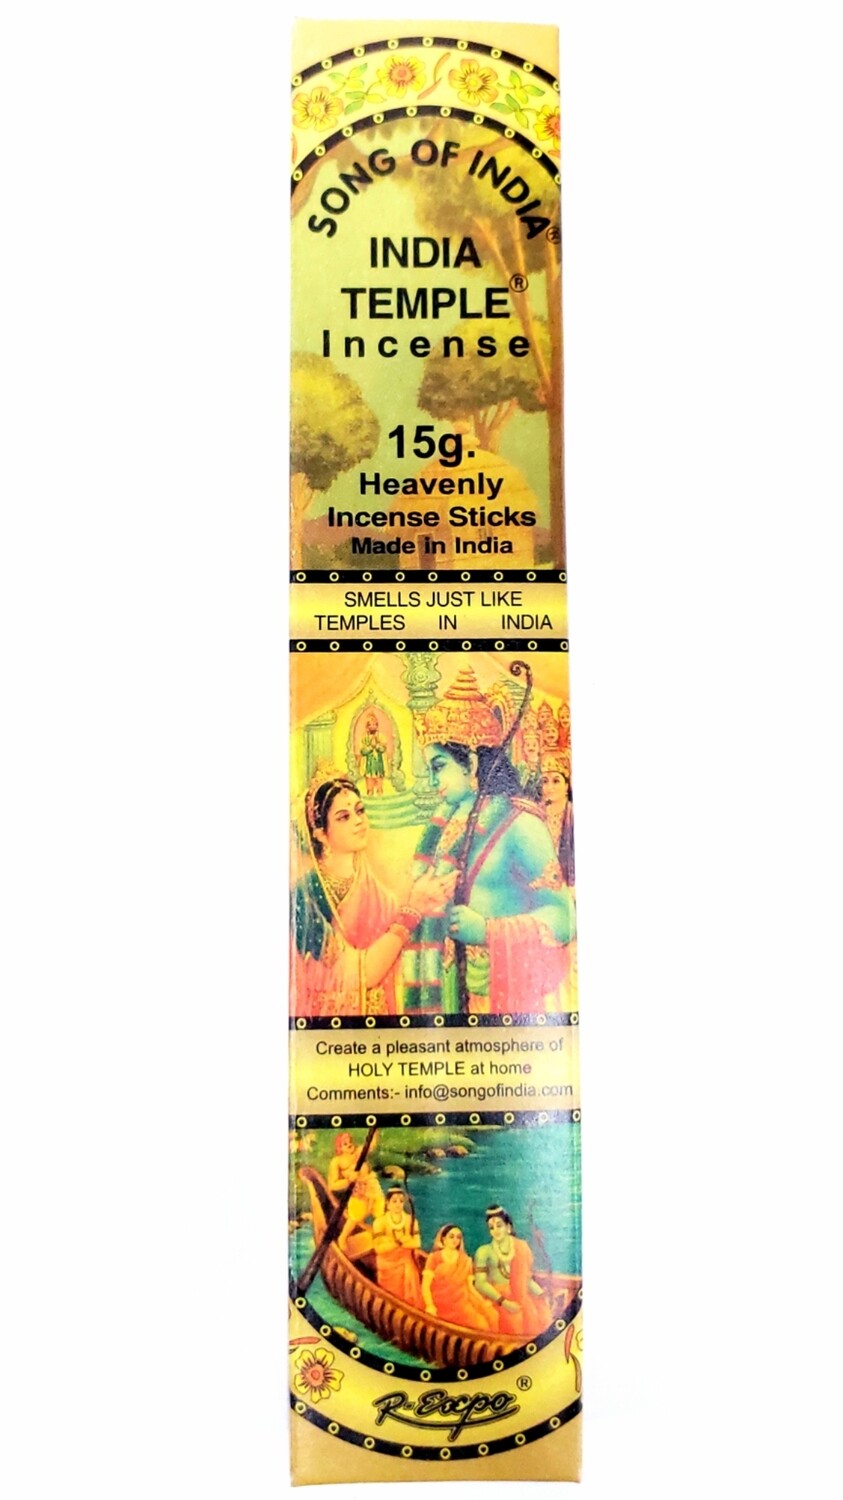 Song of India: Indian Temple Incense